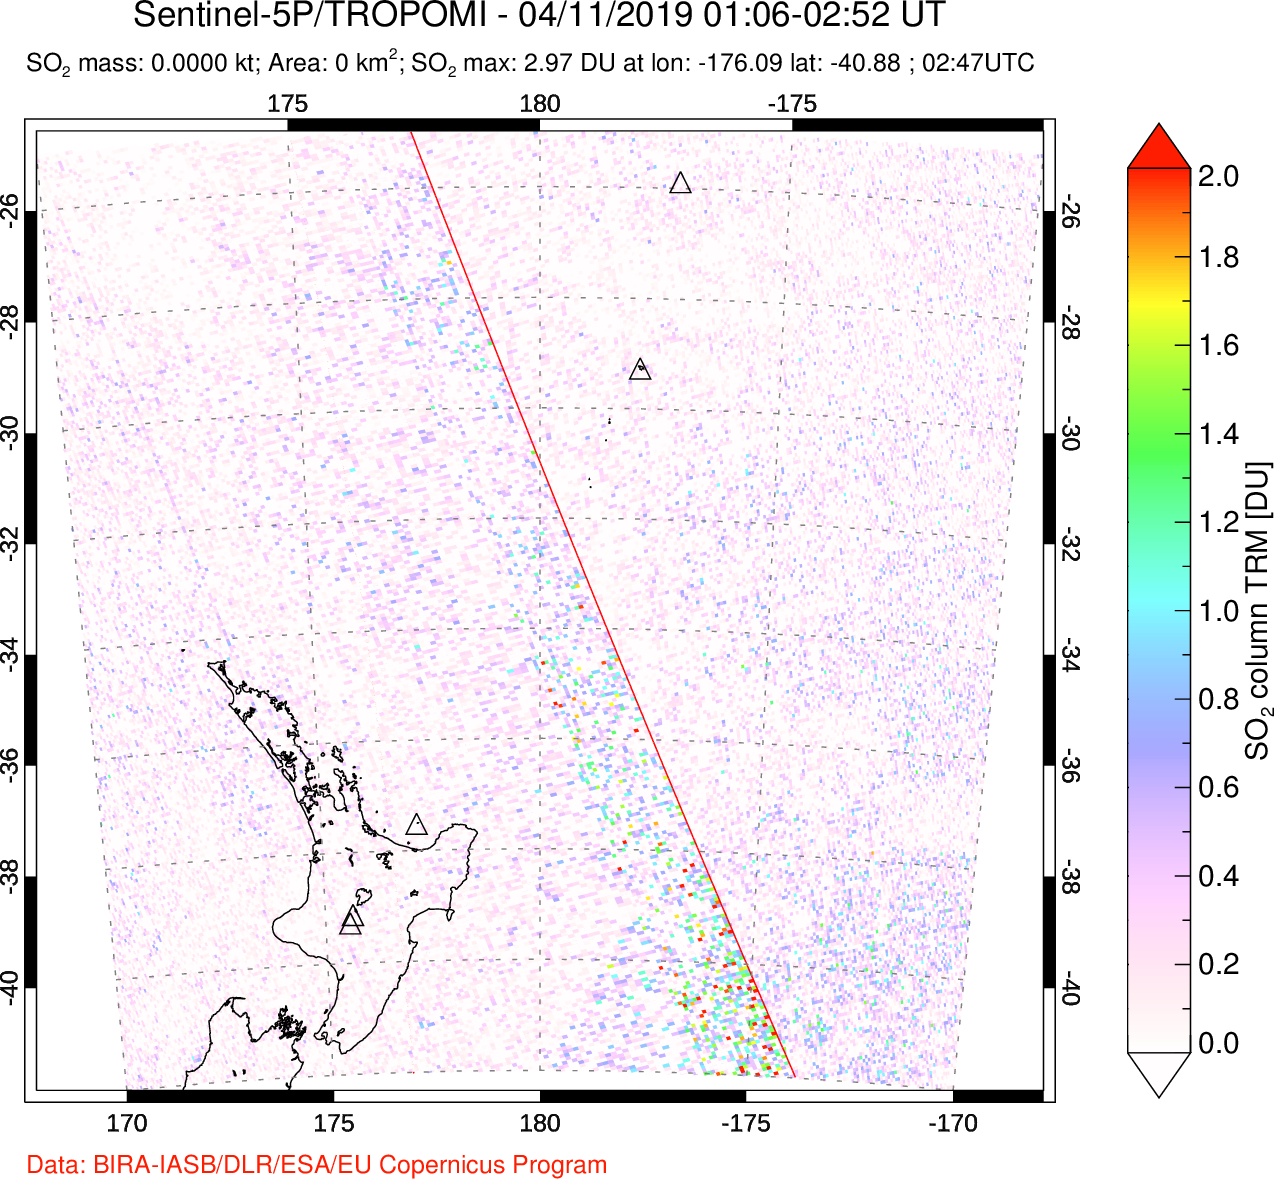 A sulfur dioxide image over New Zealand on Apr 11, 2019.